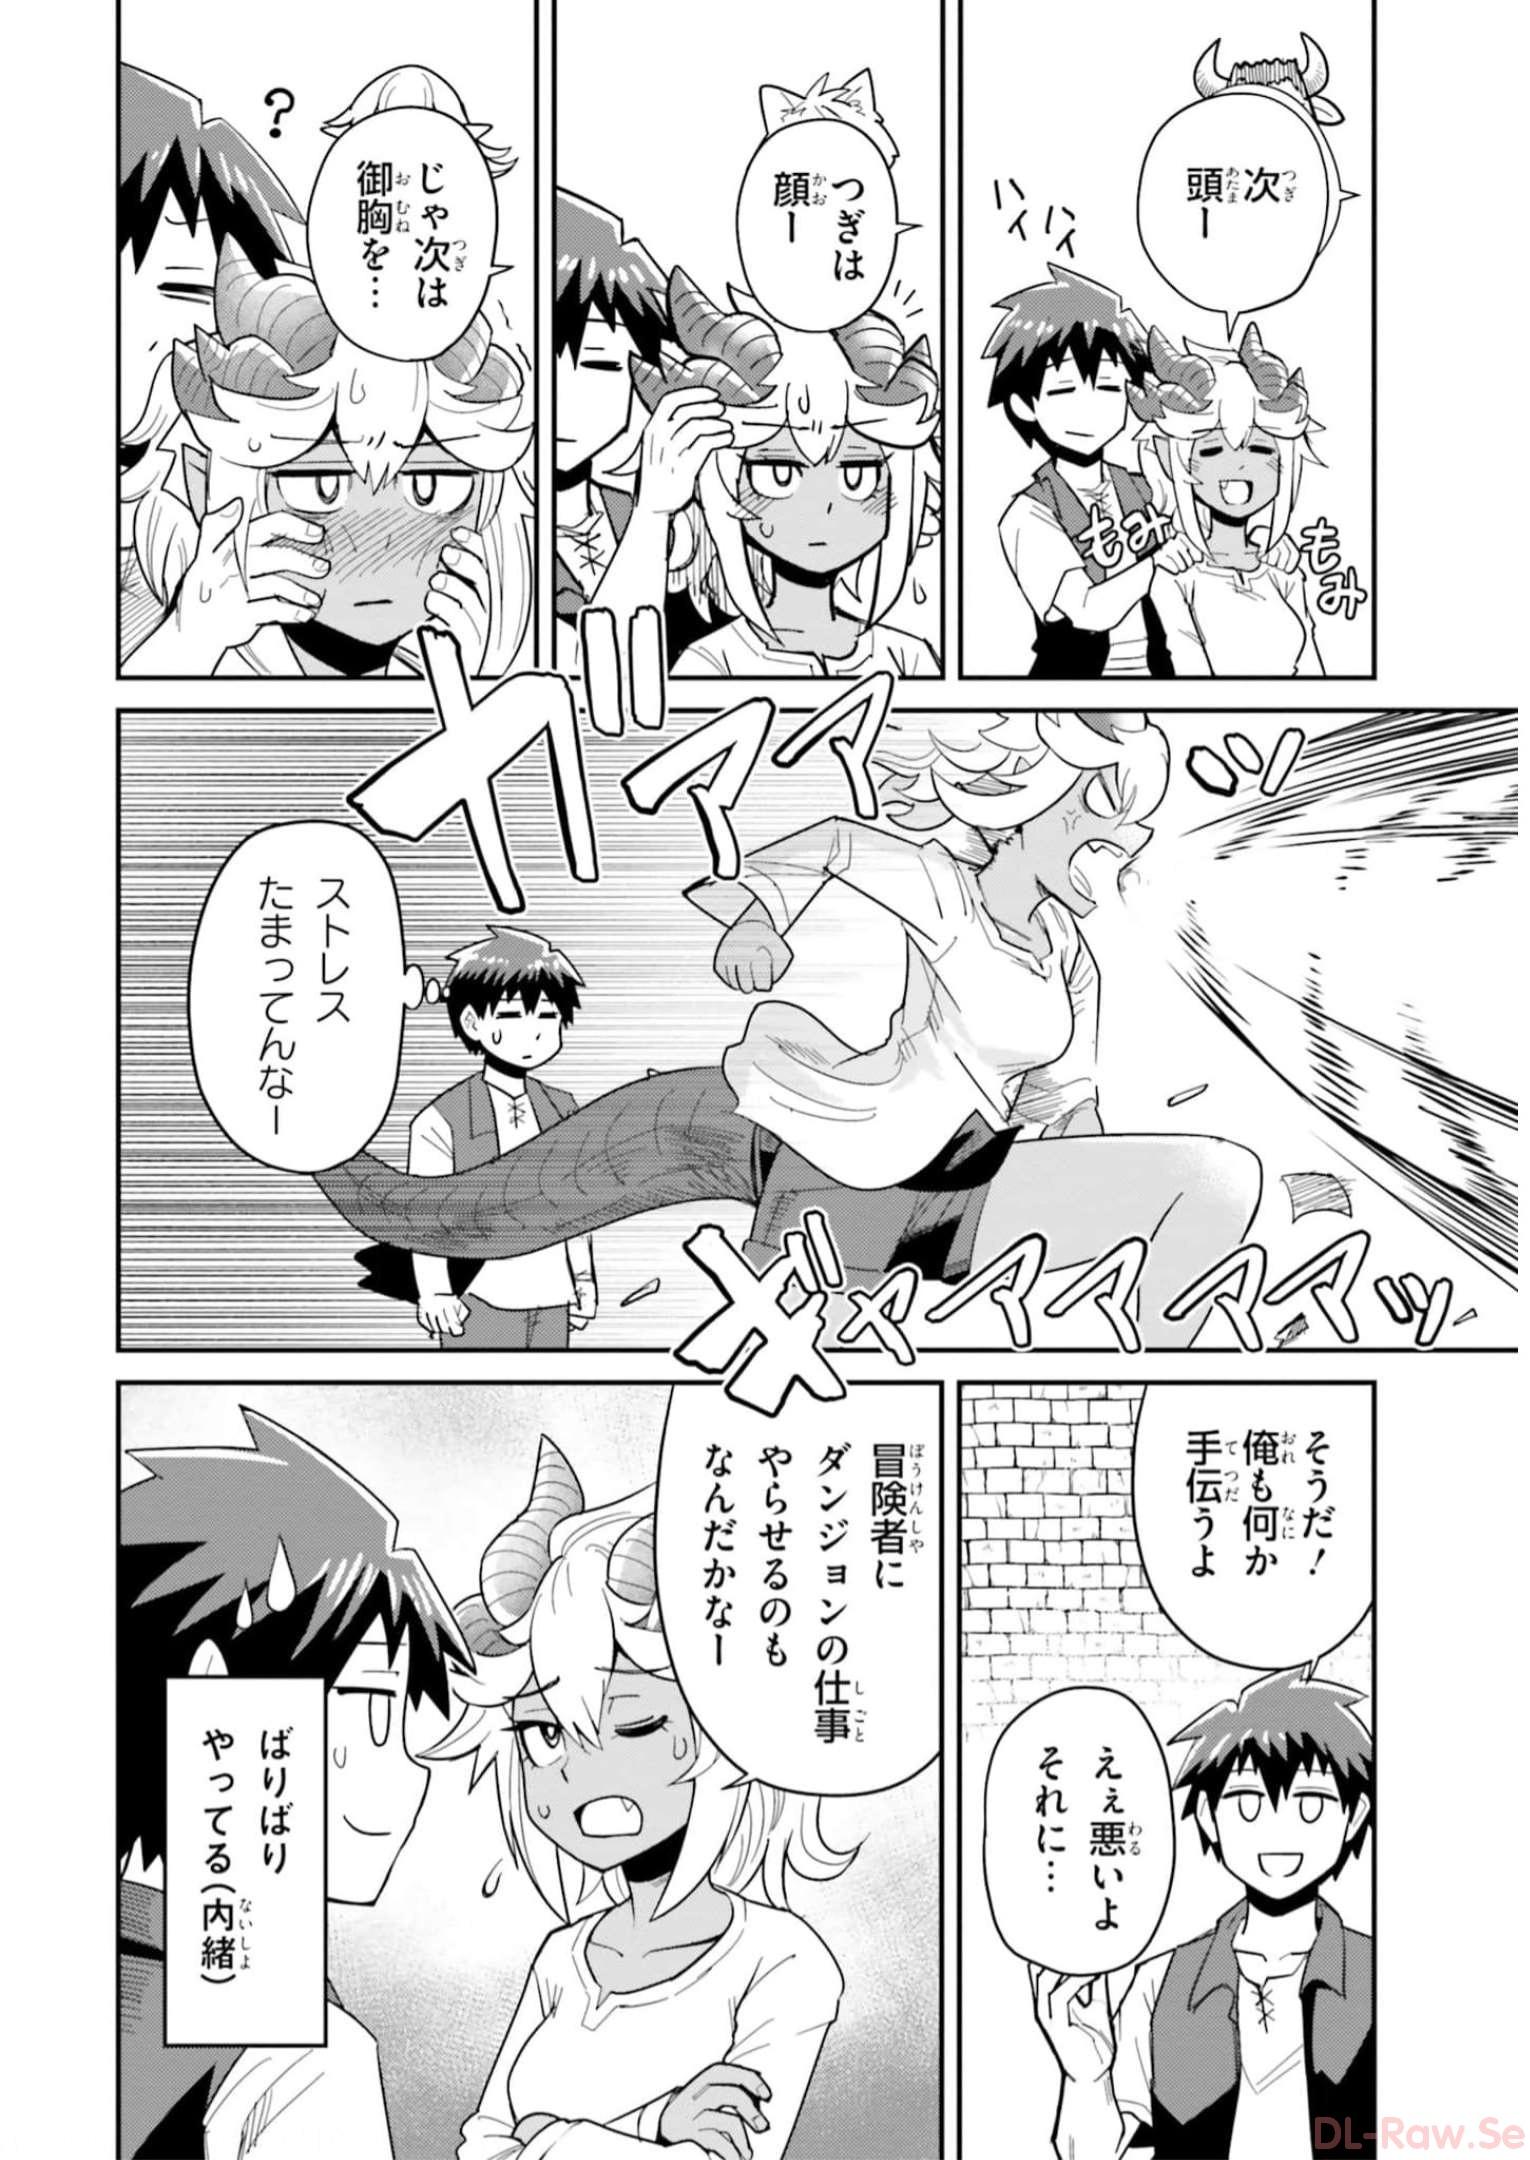 Dungeon Friends Forever Dungeon’s Childhood Friend ダンジョンの幼なじみ 第23話 - Page 6